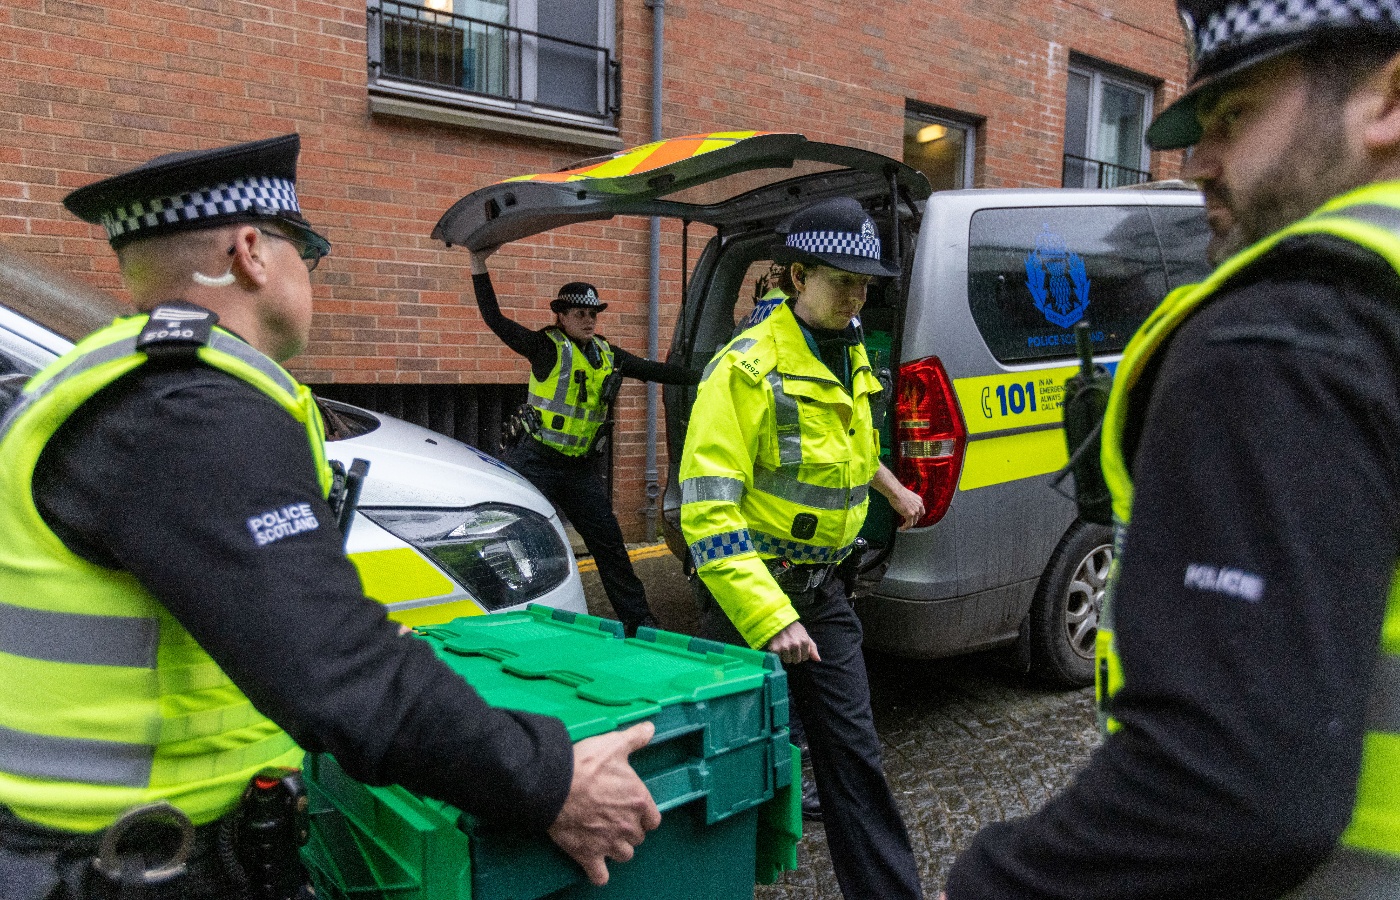 Police Scotland were seen taking several large boxes from the SNP's HQ in Edinburgh on the day the party's former chief executive was arrested.